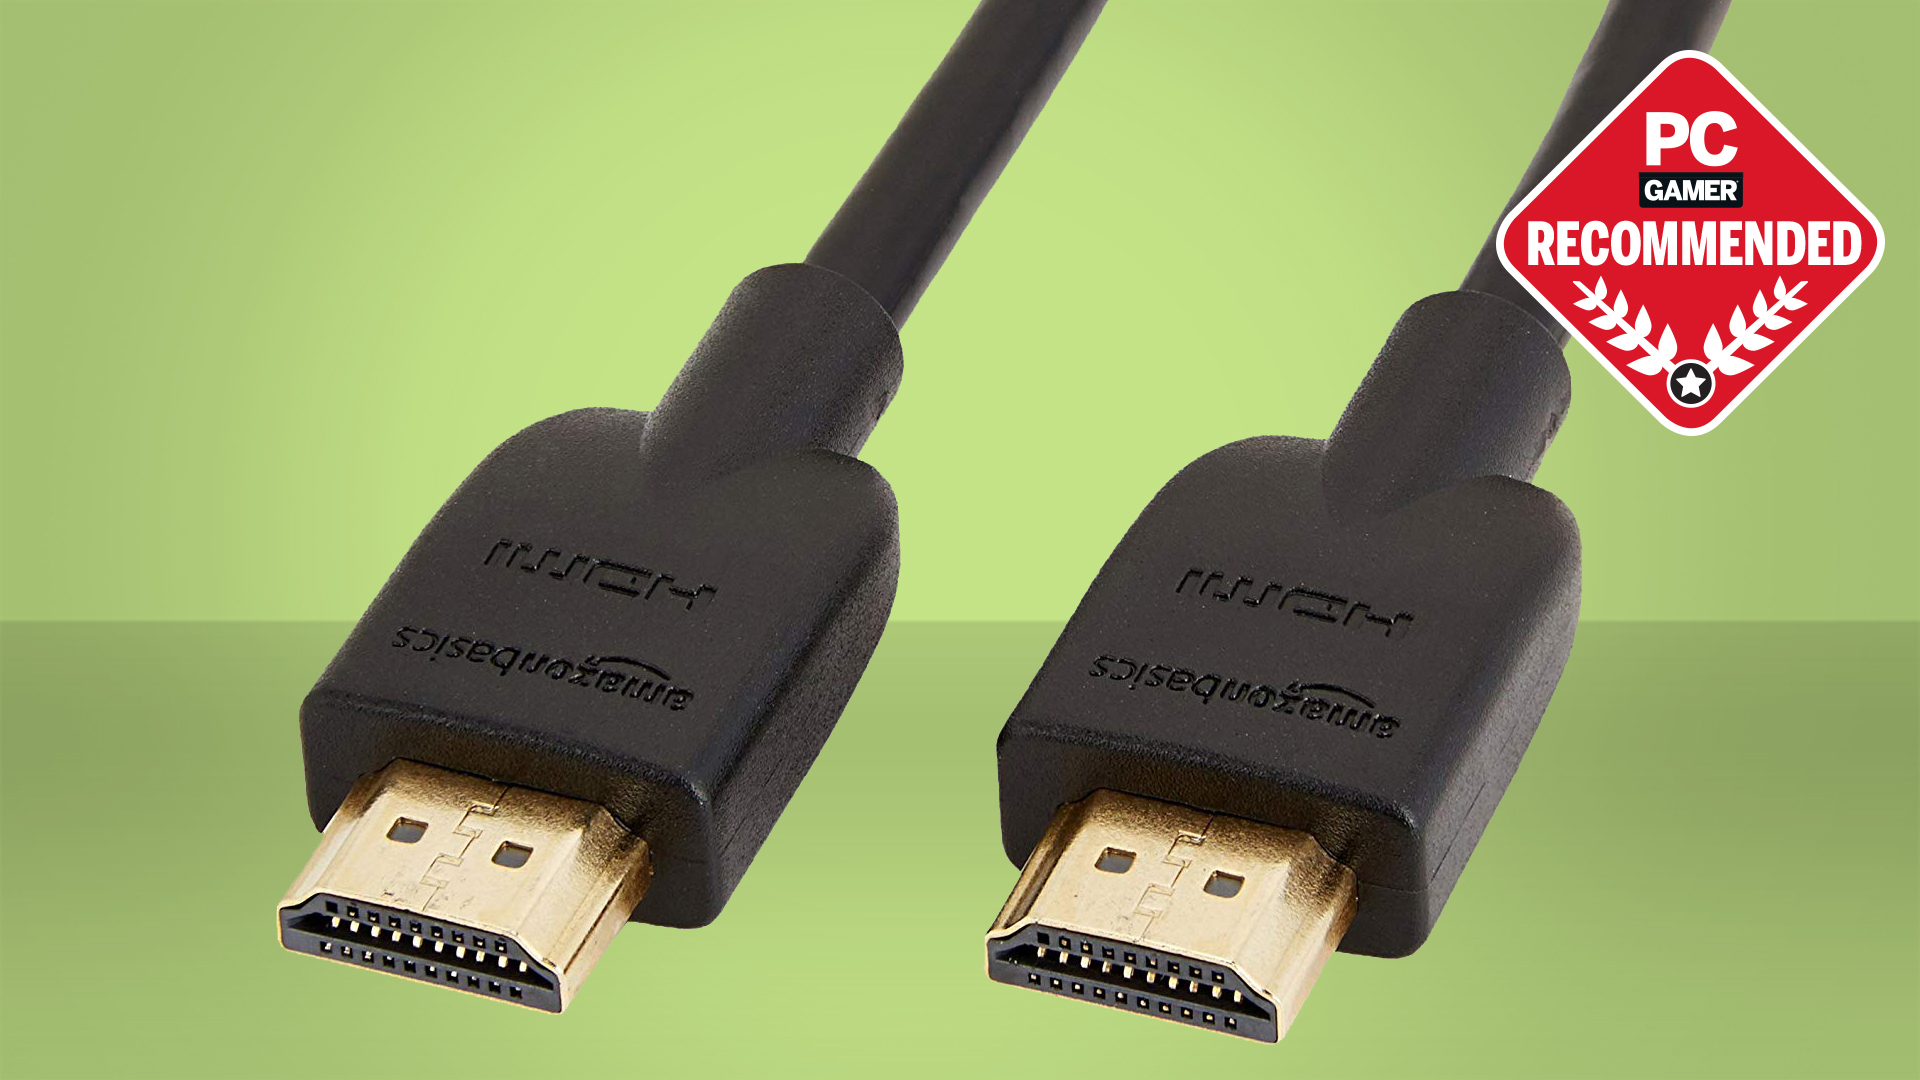 Cuarto Prever Oportuno The best HDMI cable for gaming on PC in 2021 | PC Gamer